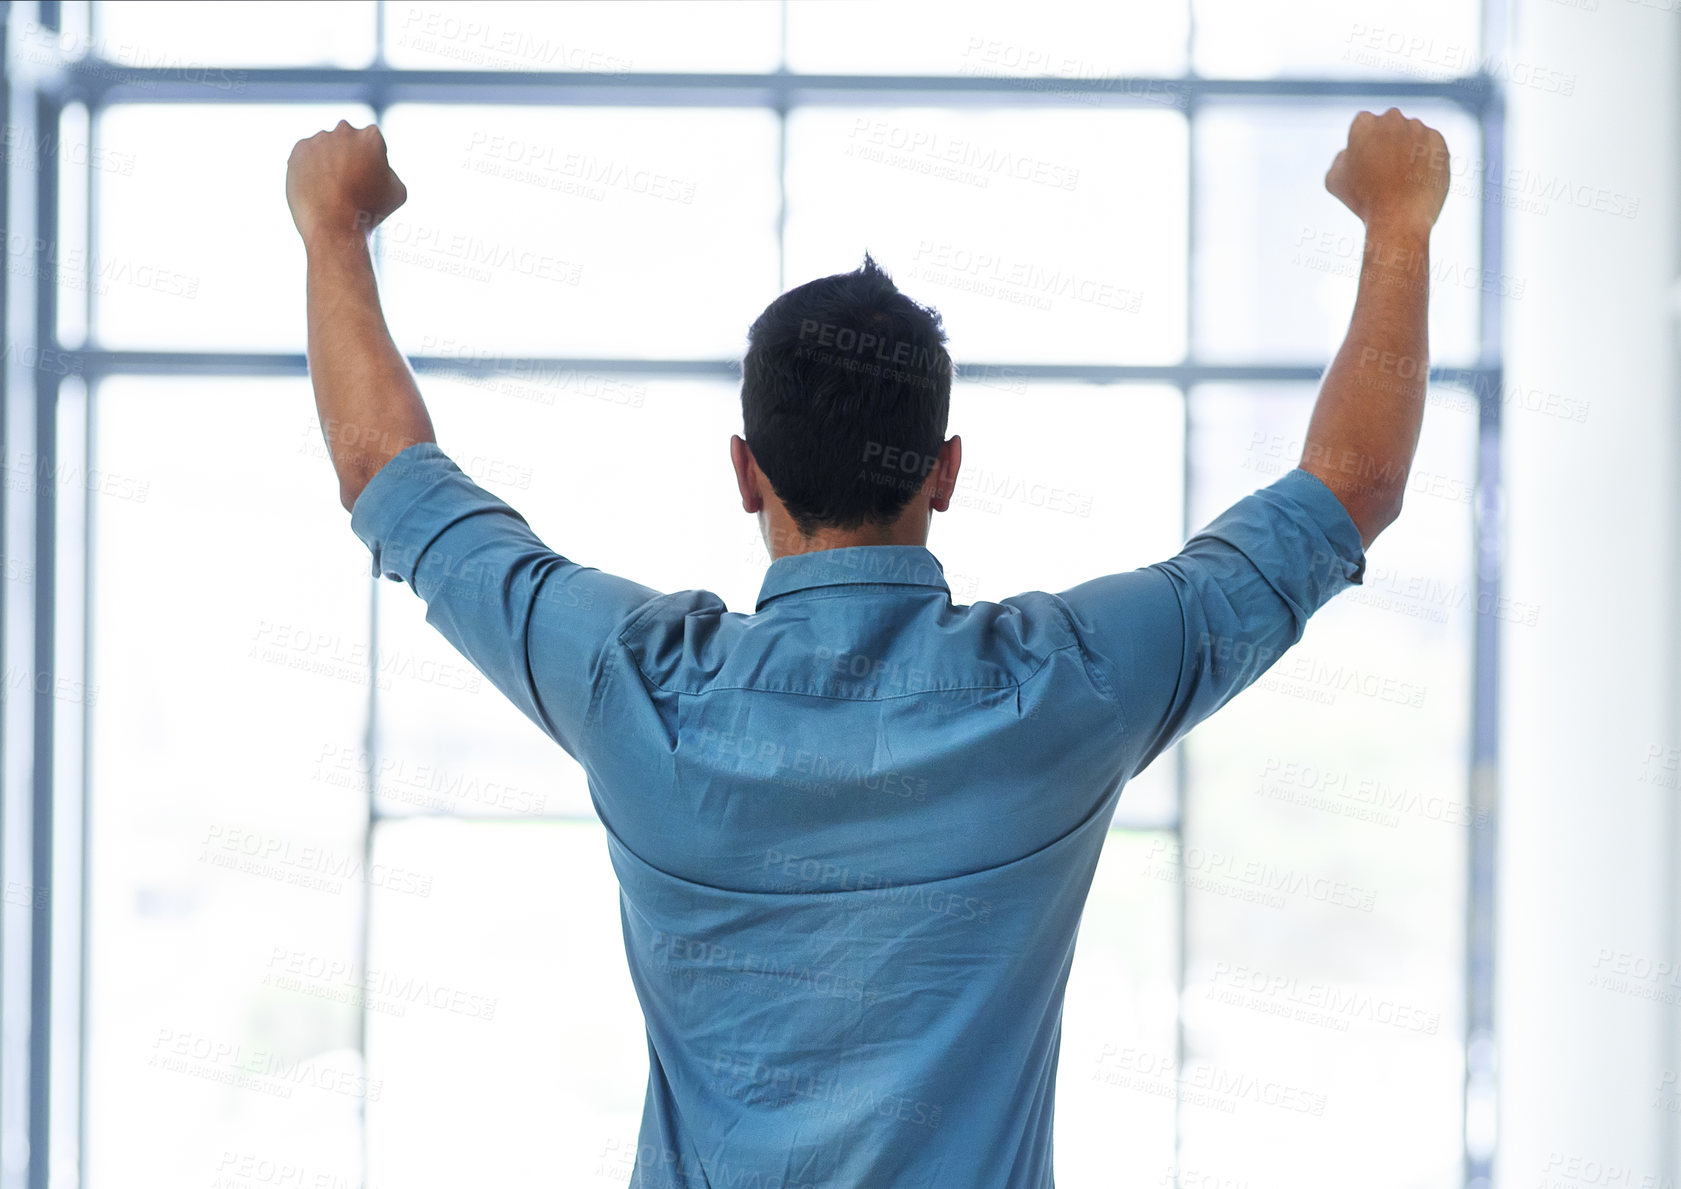 Buy stock photo Rearview shot of an unrecognizable businessman celebrating with his arms raised in a modern office